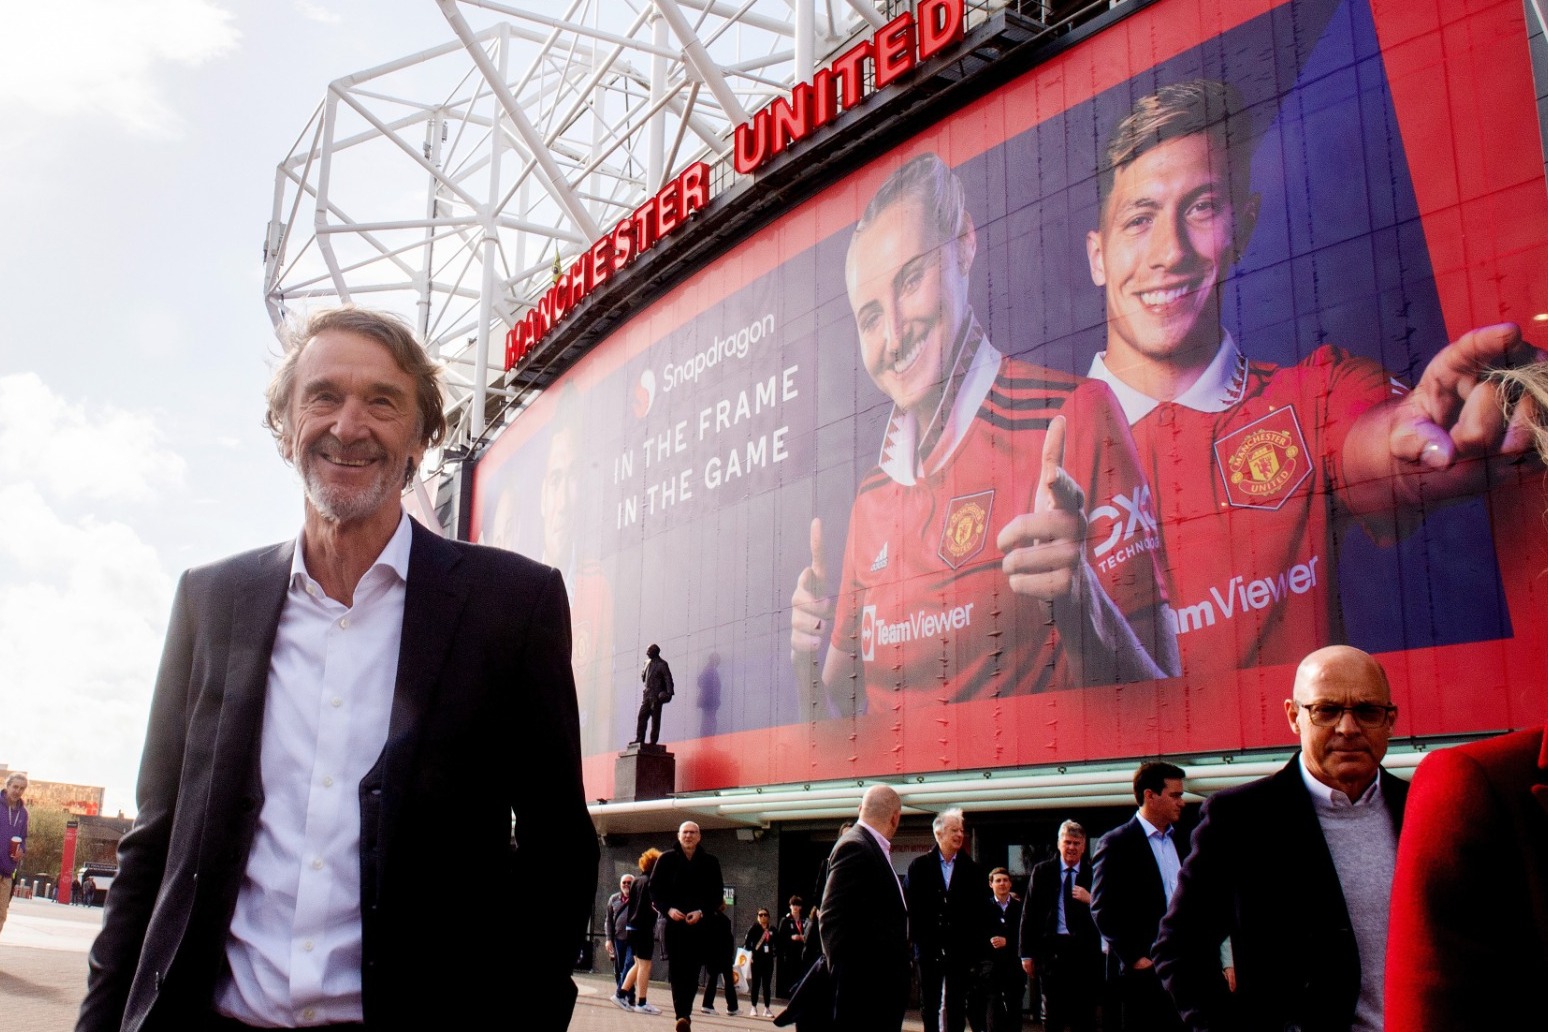 Jim Ratcliffe sets out vision for Manchester United